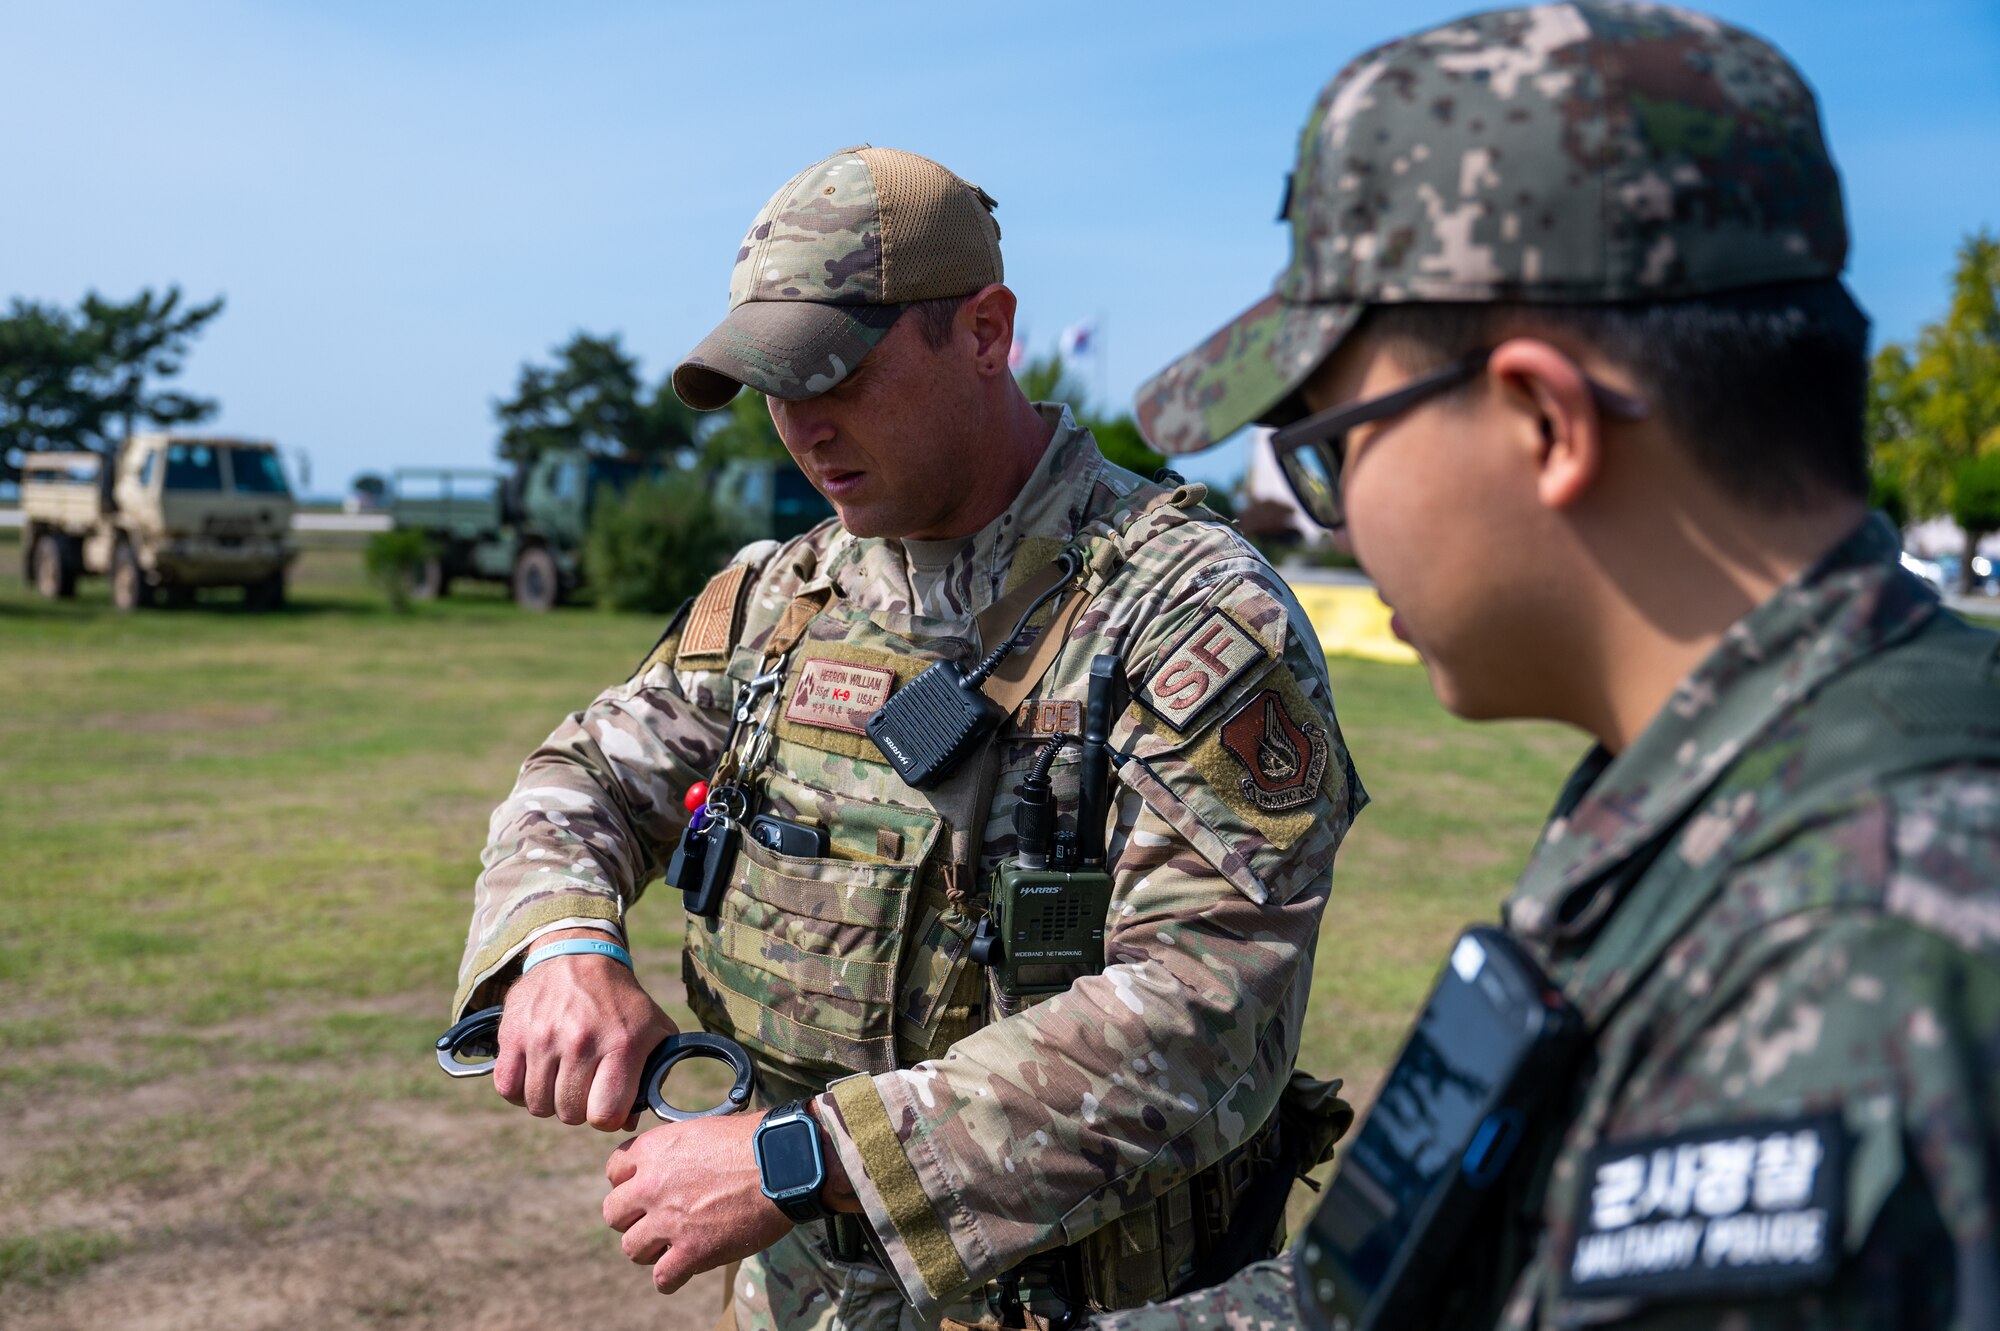 U.S. Air Force Staff Sgt. William Herron Republic of Korea Air Force Airmen 1st Class Huiseop Lin train techniques, tactics and procedures in preparation for the first-ever combined security patrol.